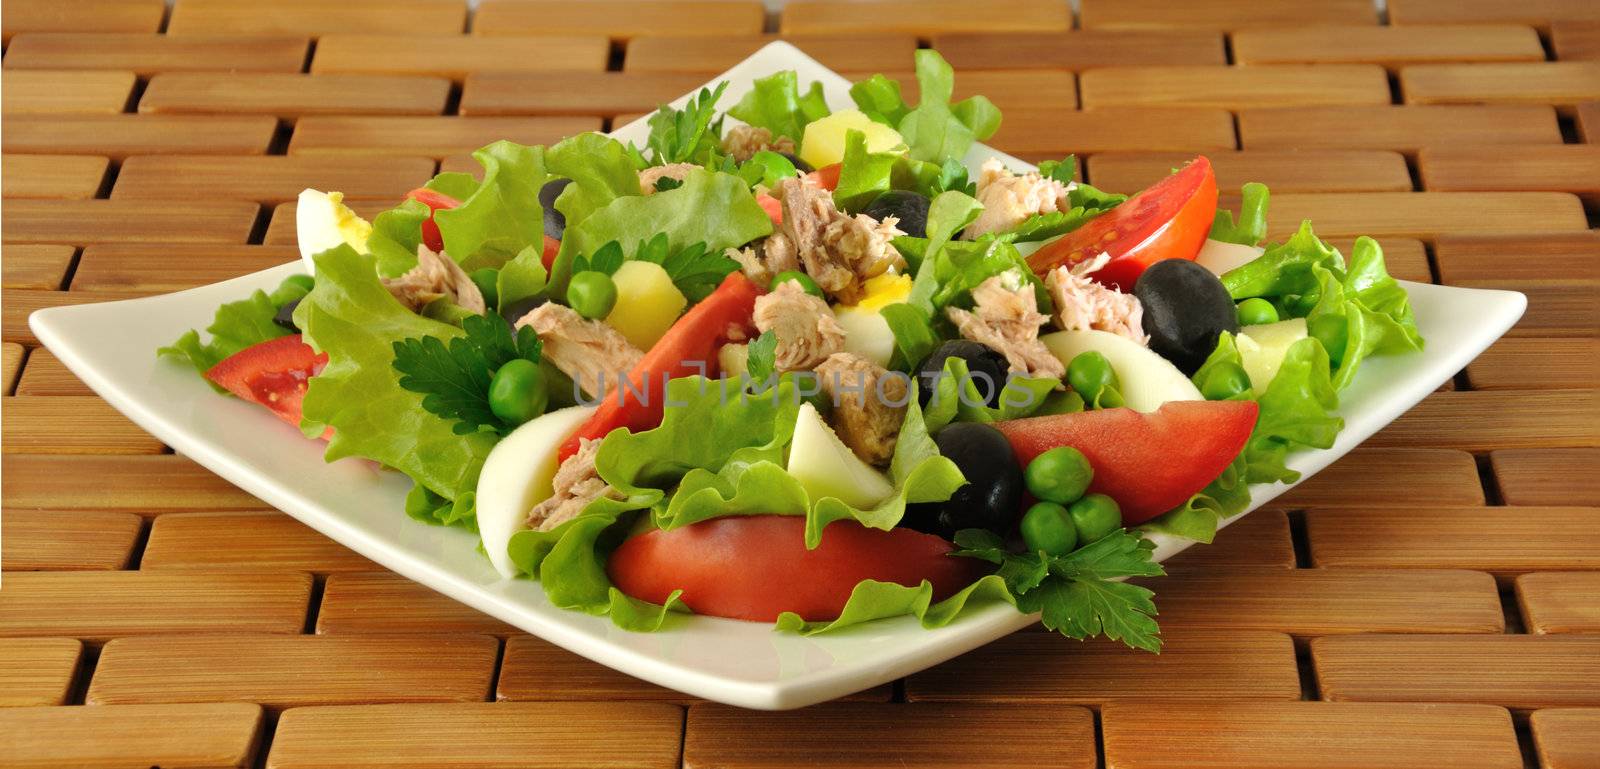 Vegetable salad with tuna and egg by Apolonia